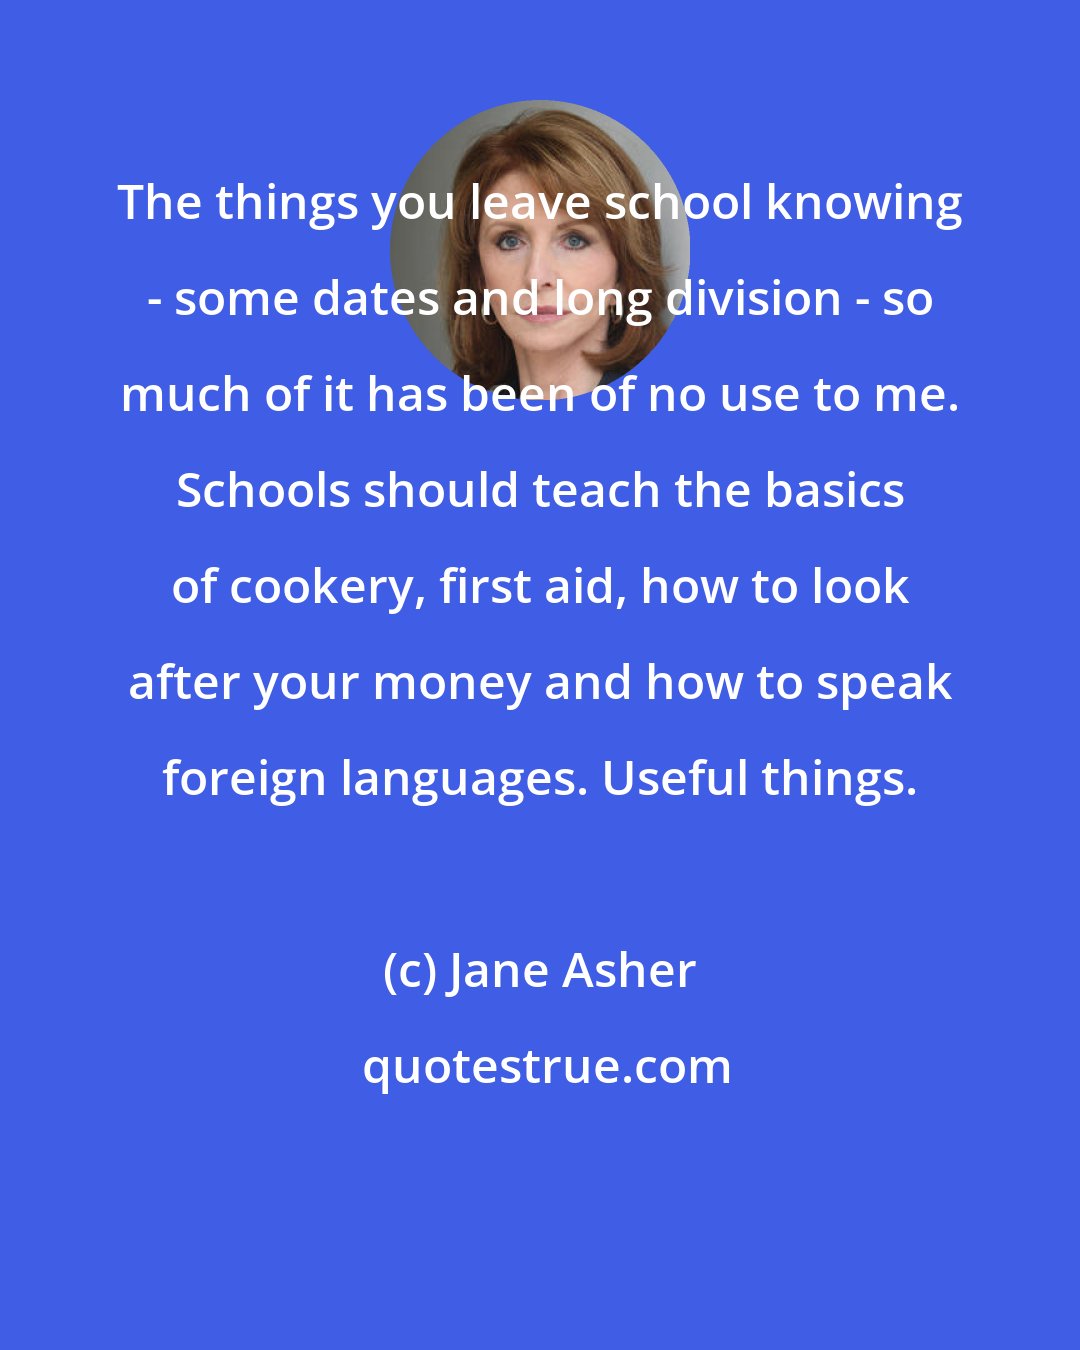 Jane Asher: The things you leave school knowing - some dates and long division - so much of it has been of no use to me. Schools should teach the basics of cookery, first aid, how to look after your money and how to speak foreign languages. Useful things.